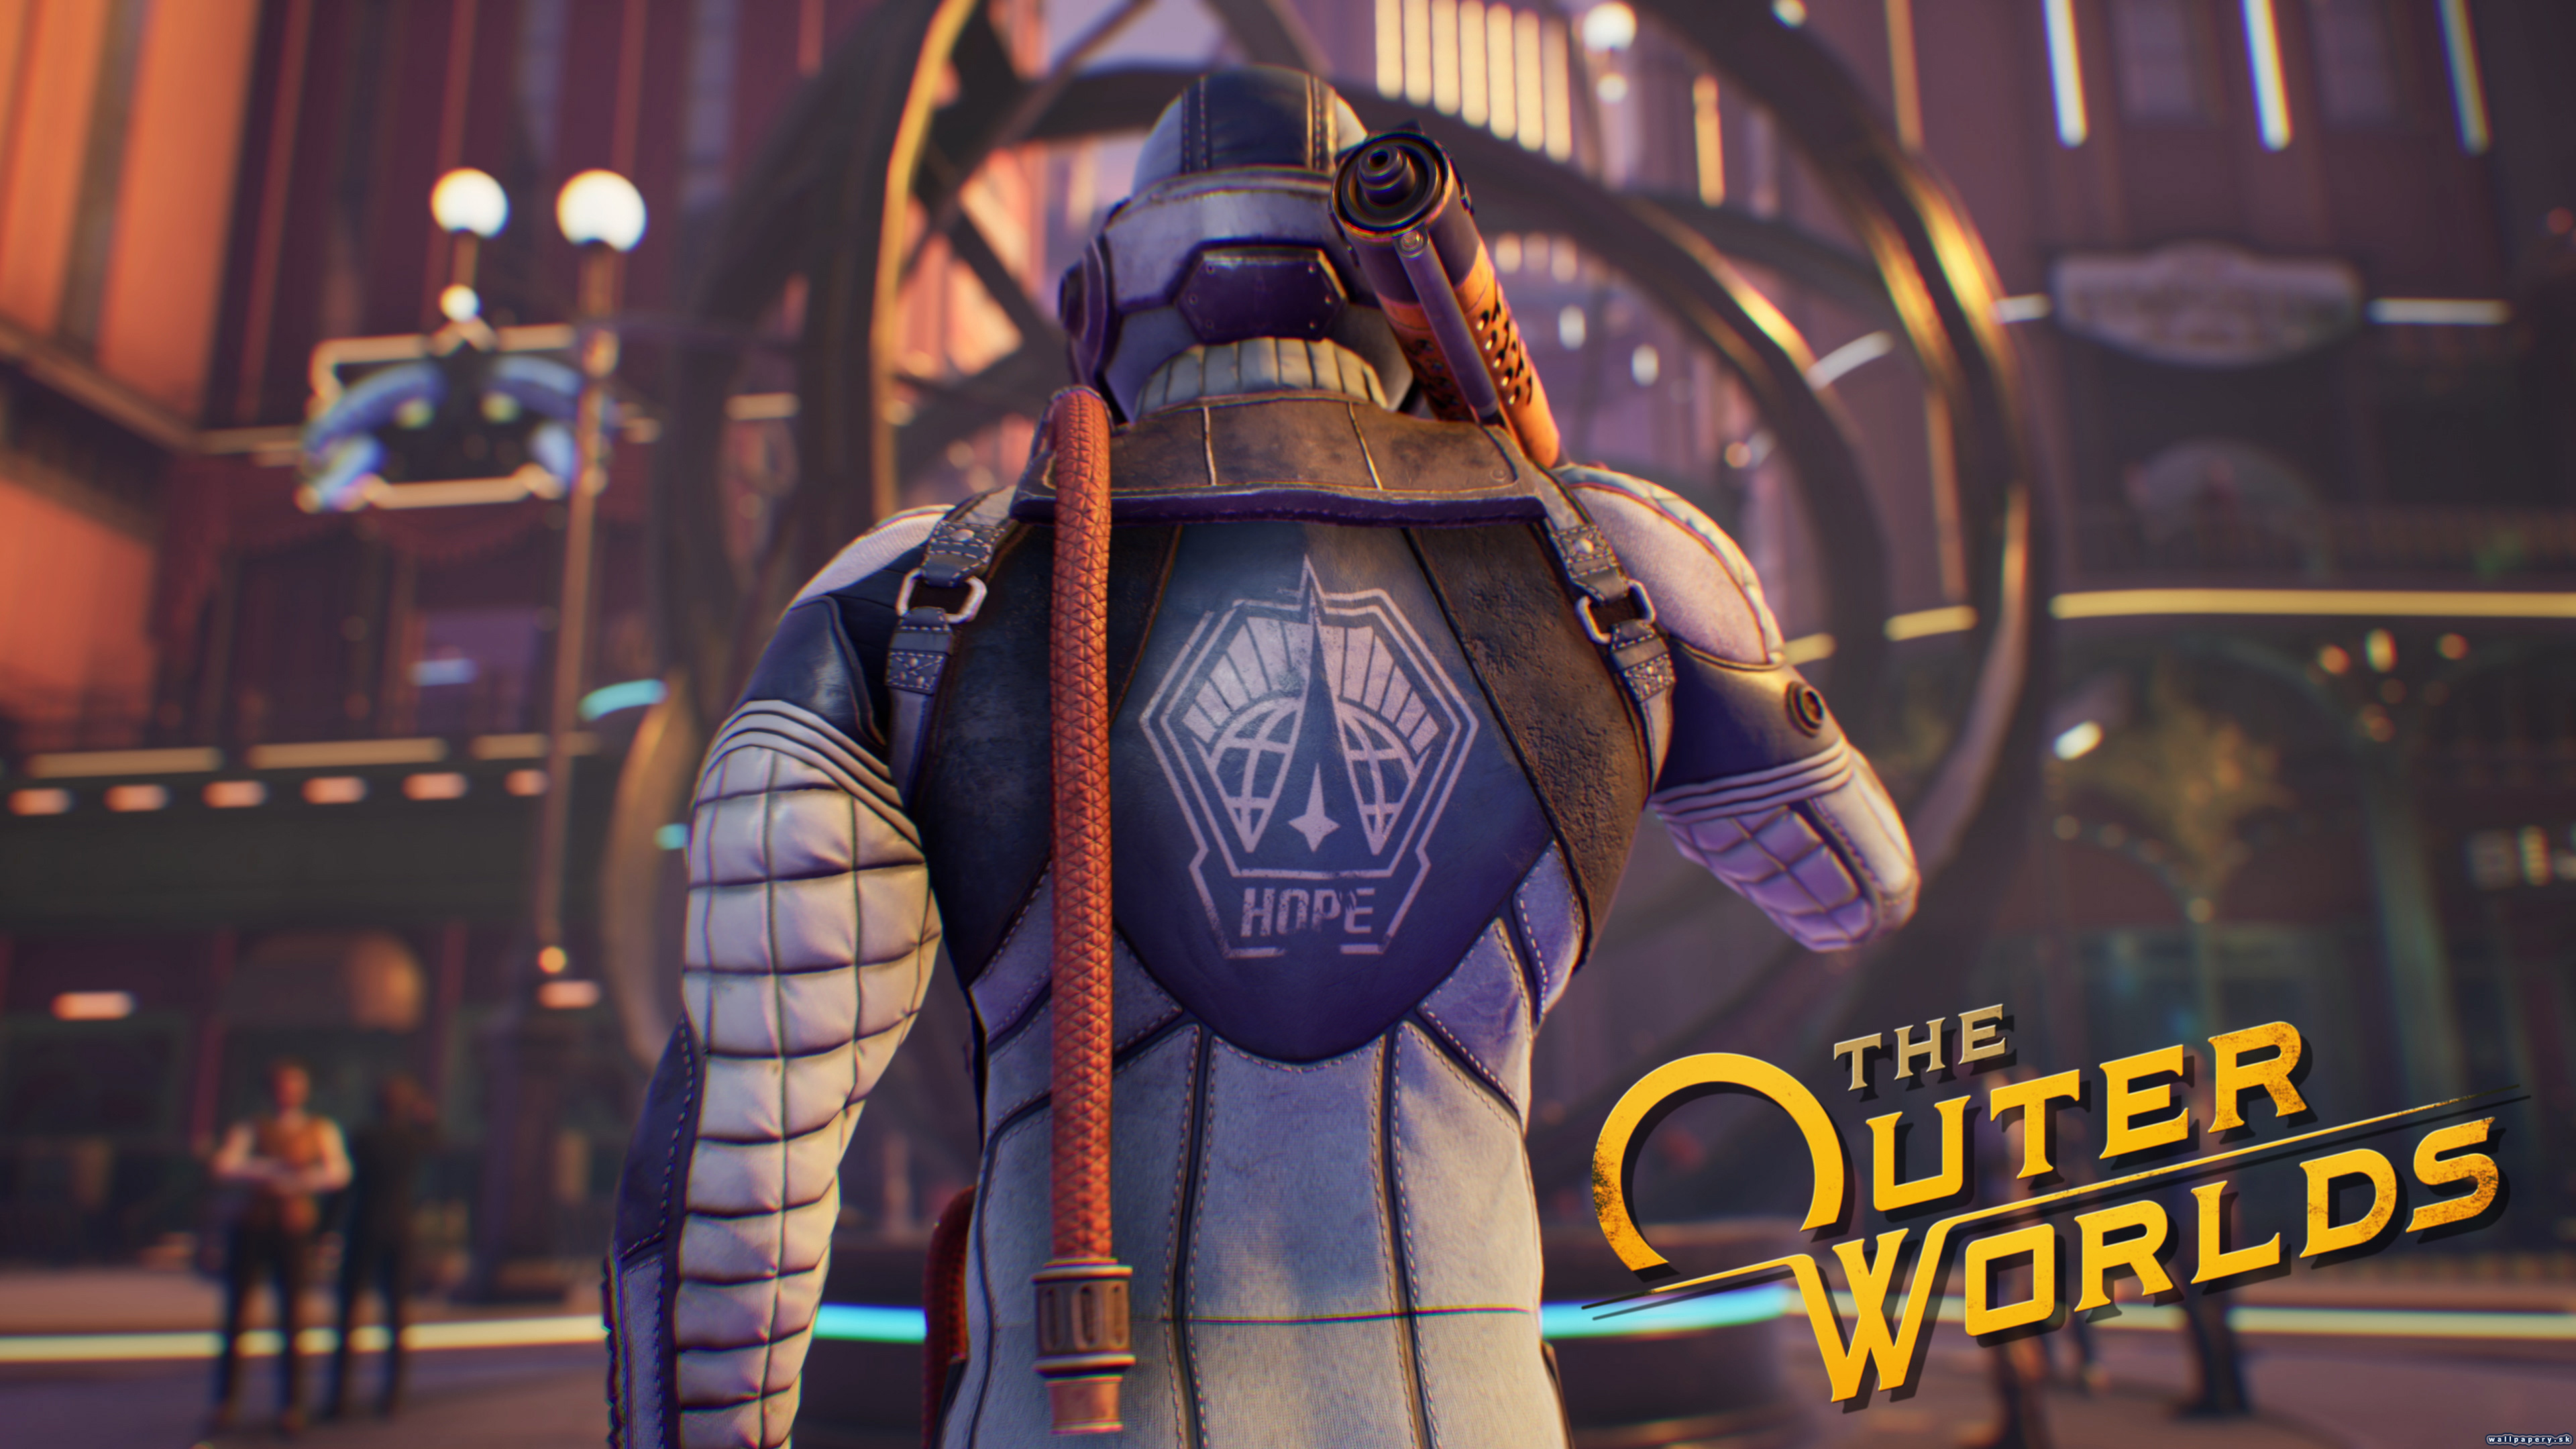 The Outer Worlds - wallpaper 2